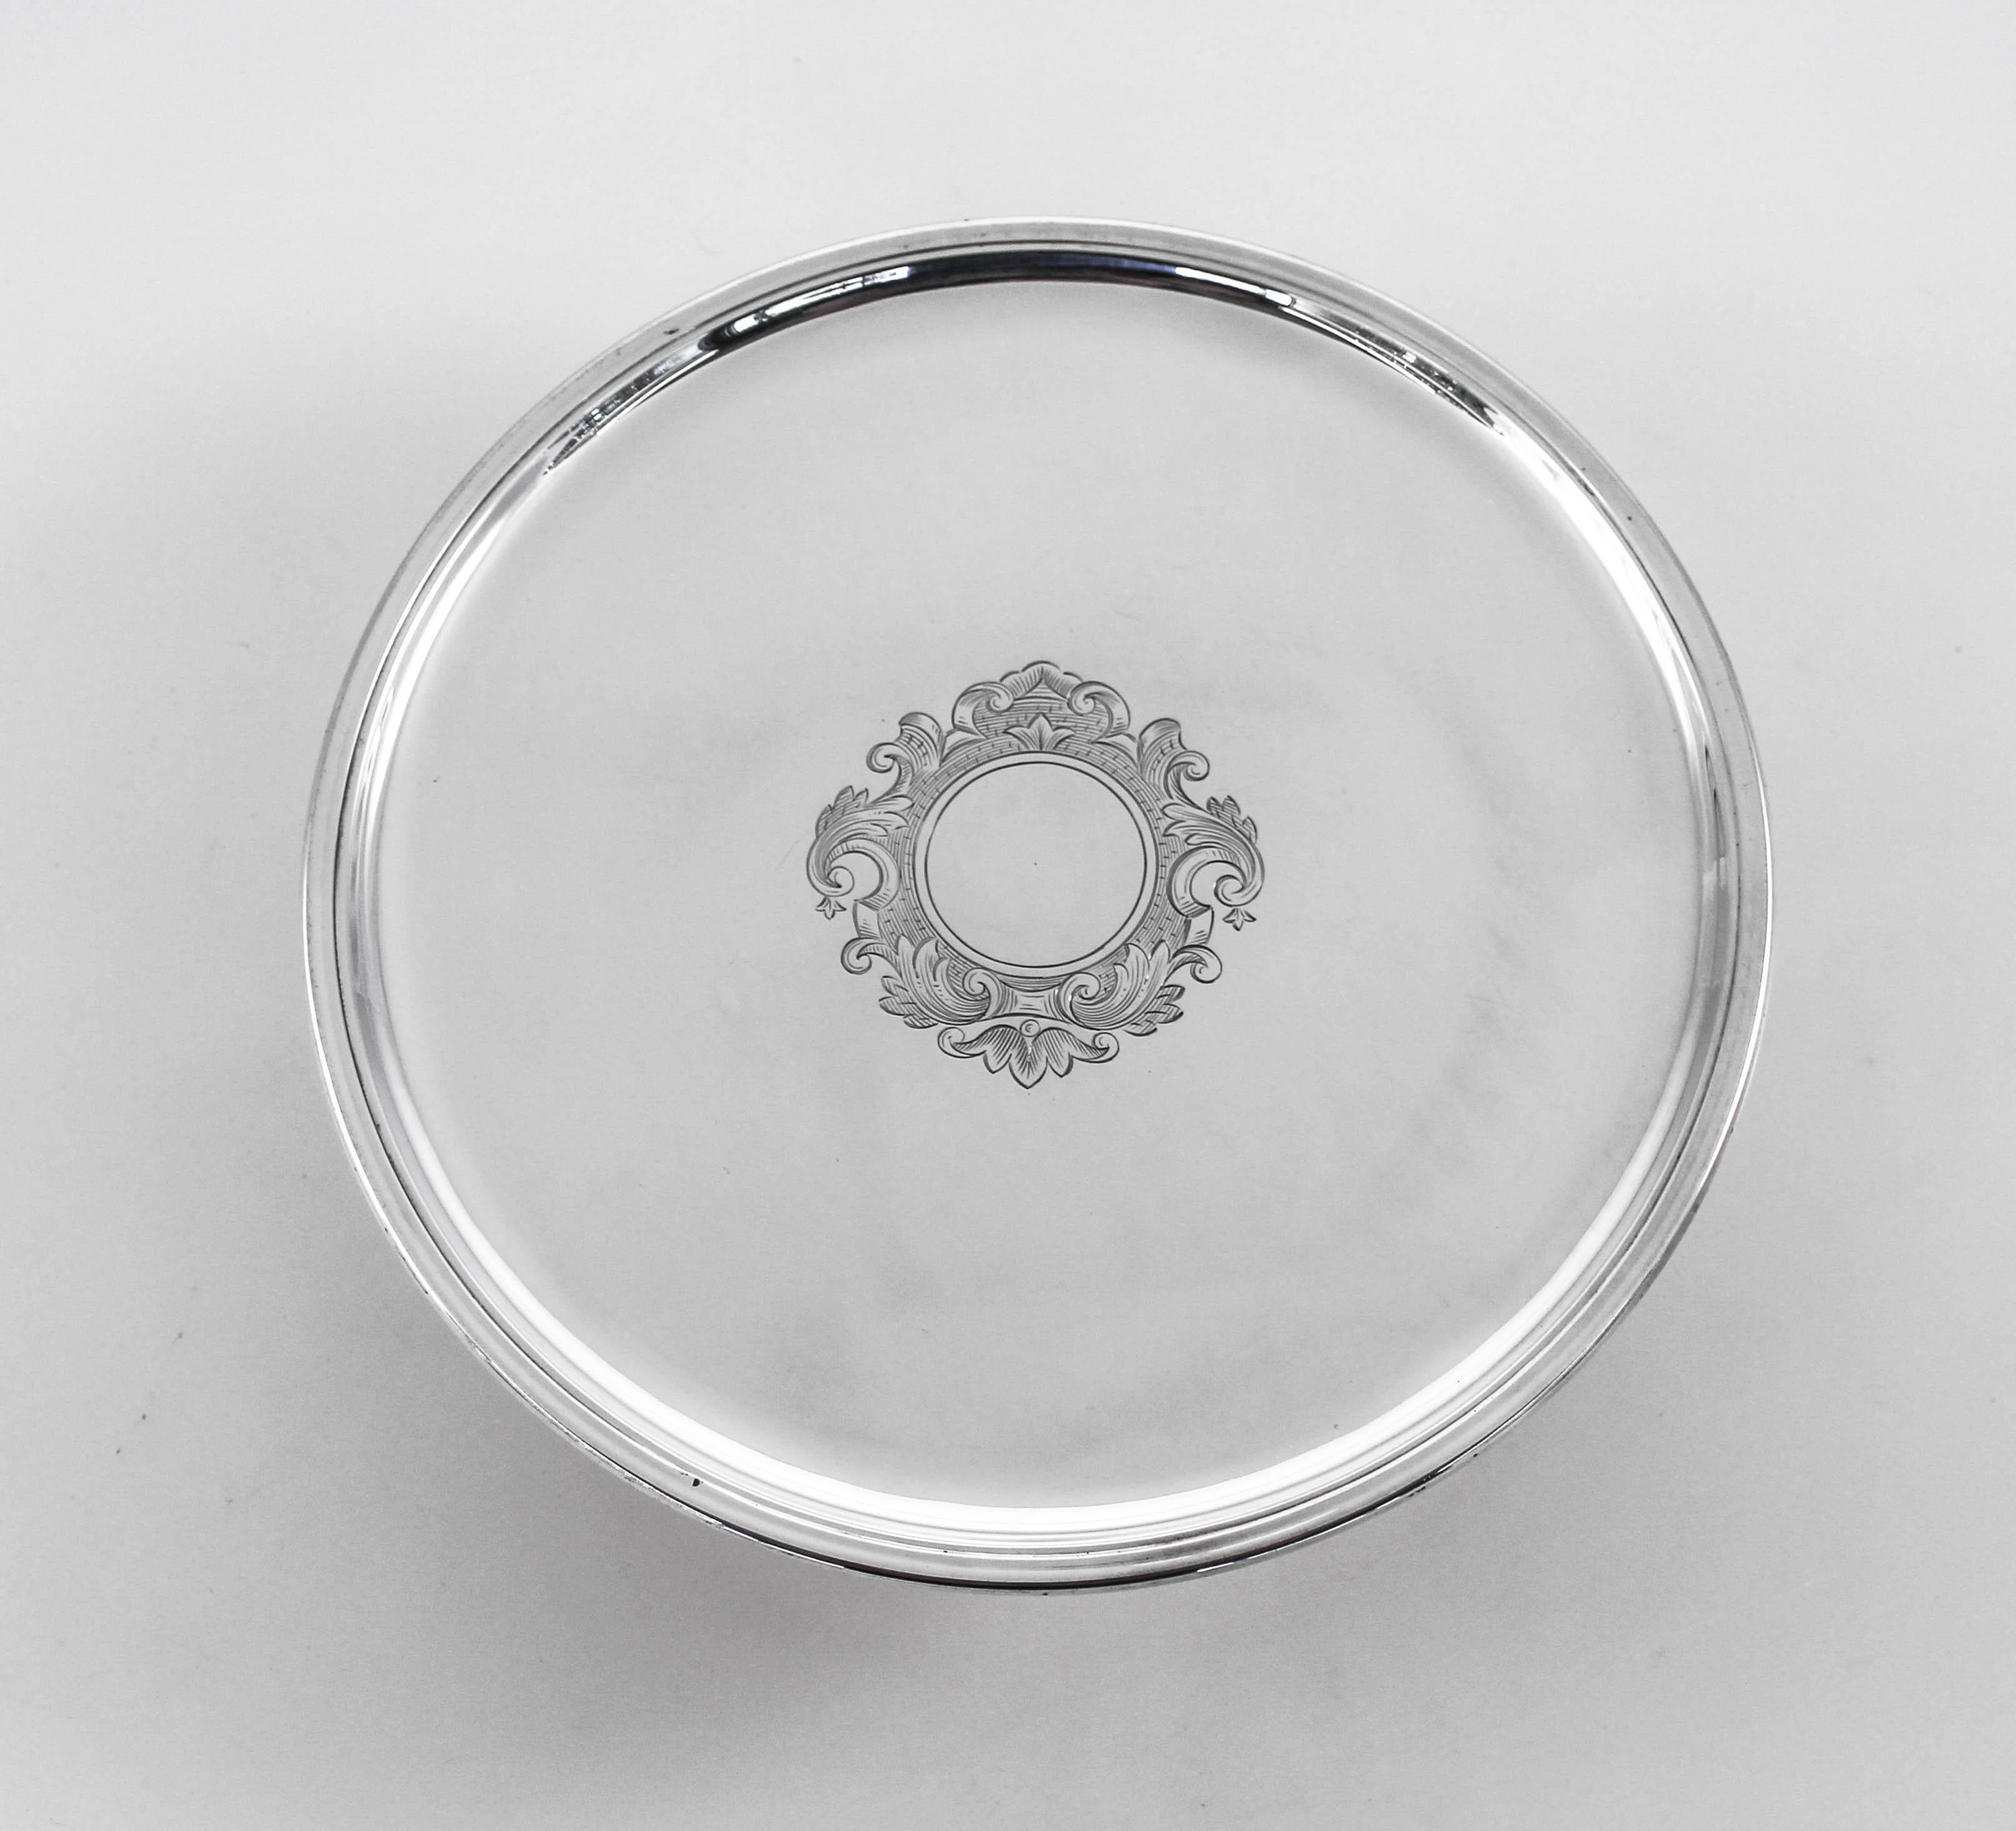 Proudly offering a pair of sterling silver tazzes by the English silversmith, Lionel Alfred Crichton of London. Unlike a compote, a tazz has a flat surface which makes it ideal for serving pastries or finger-food. They have a classic English design;